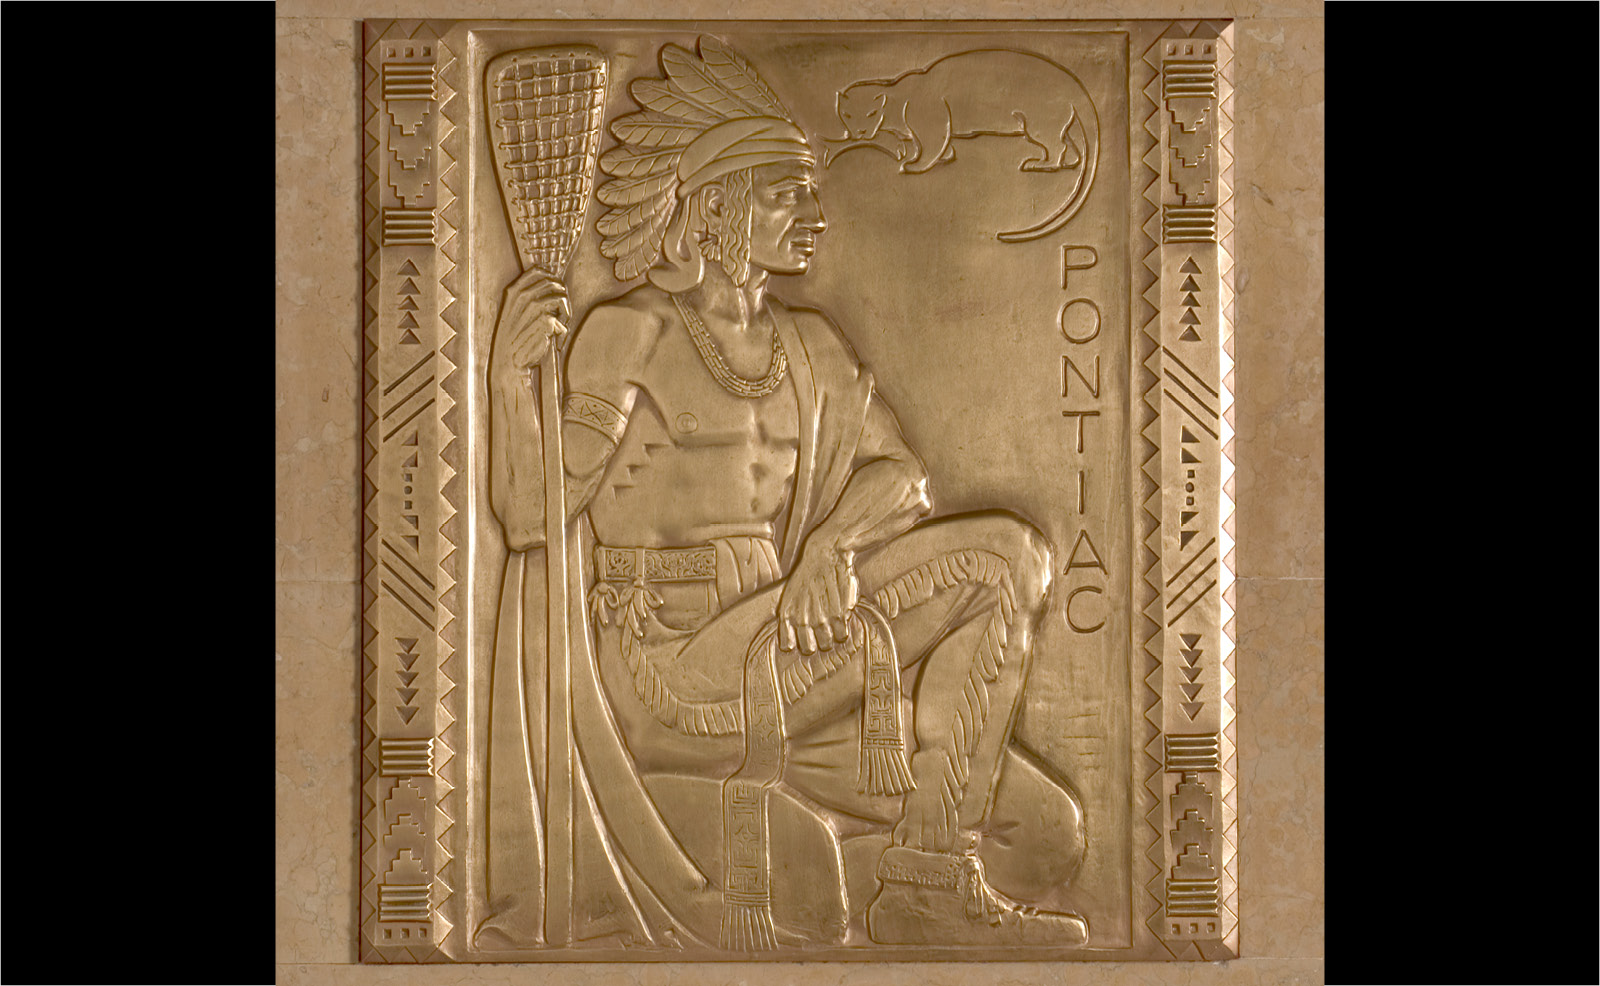 Image of a bronze bas relief of American Indian leader Pontiac